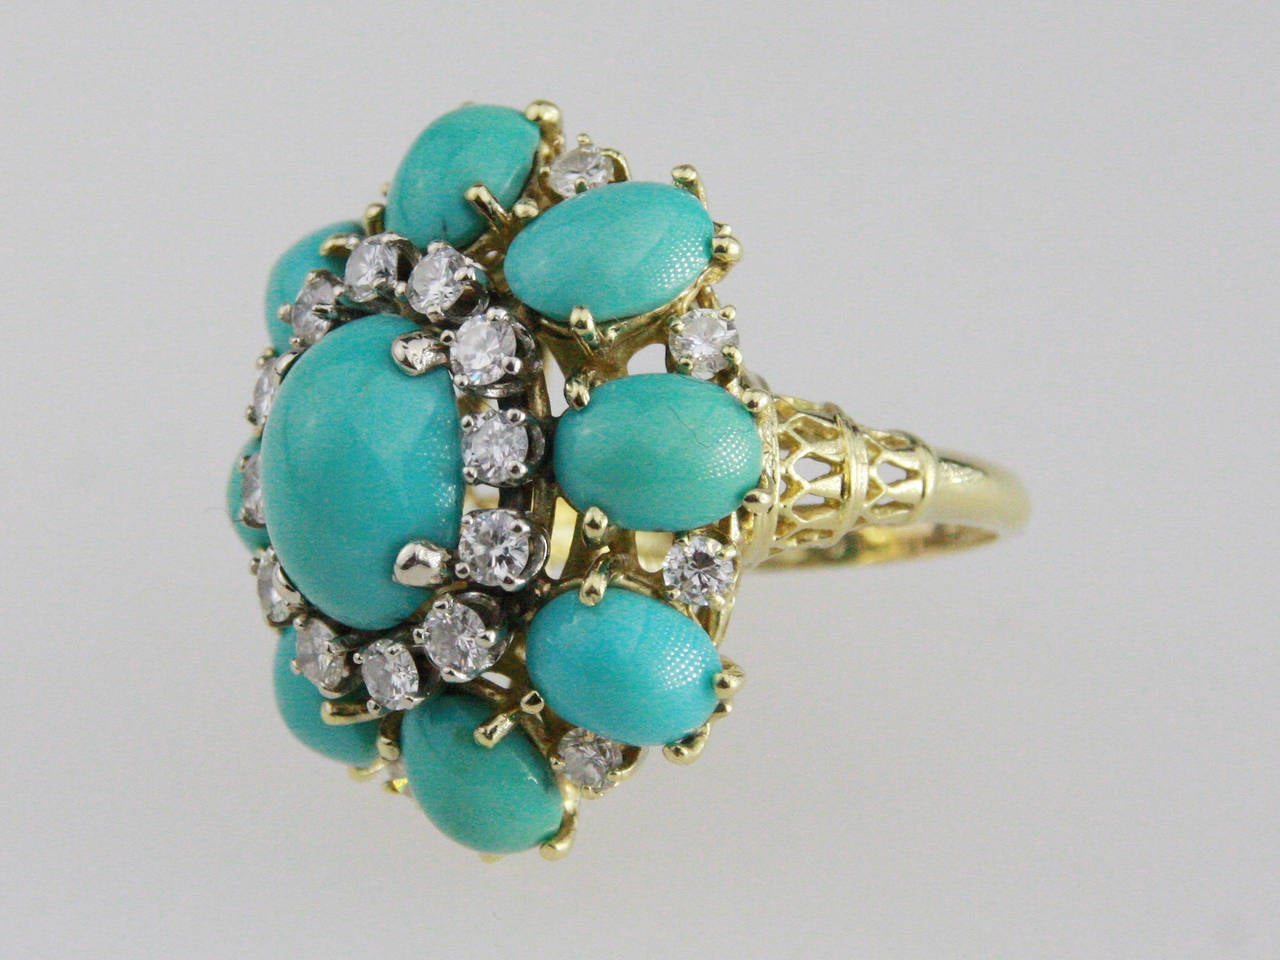 The ring is set with 9 oval turquoise cabochons, and 20 round diamonds. 
Size 5. Can be sized at no charge.